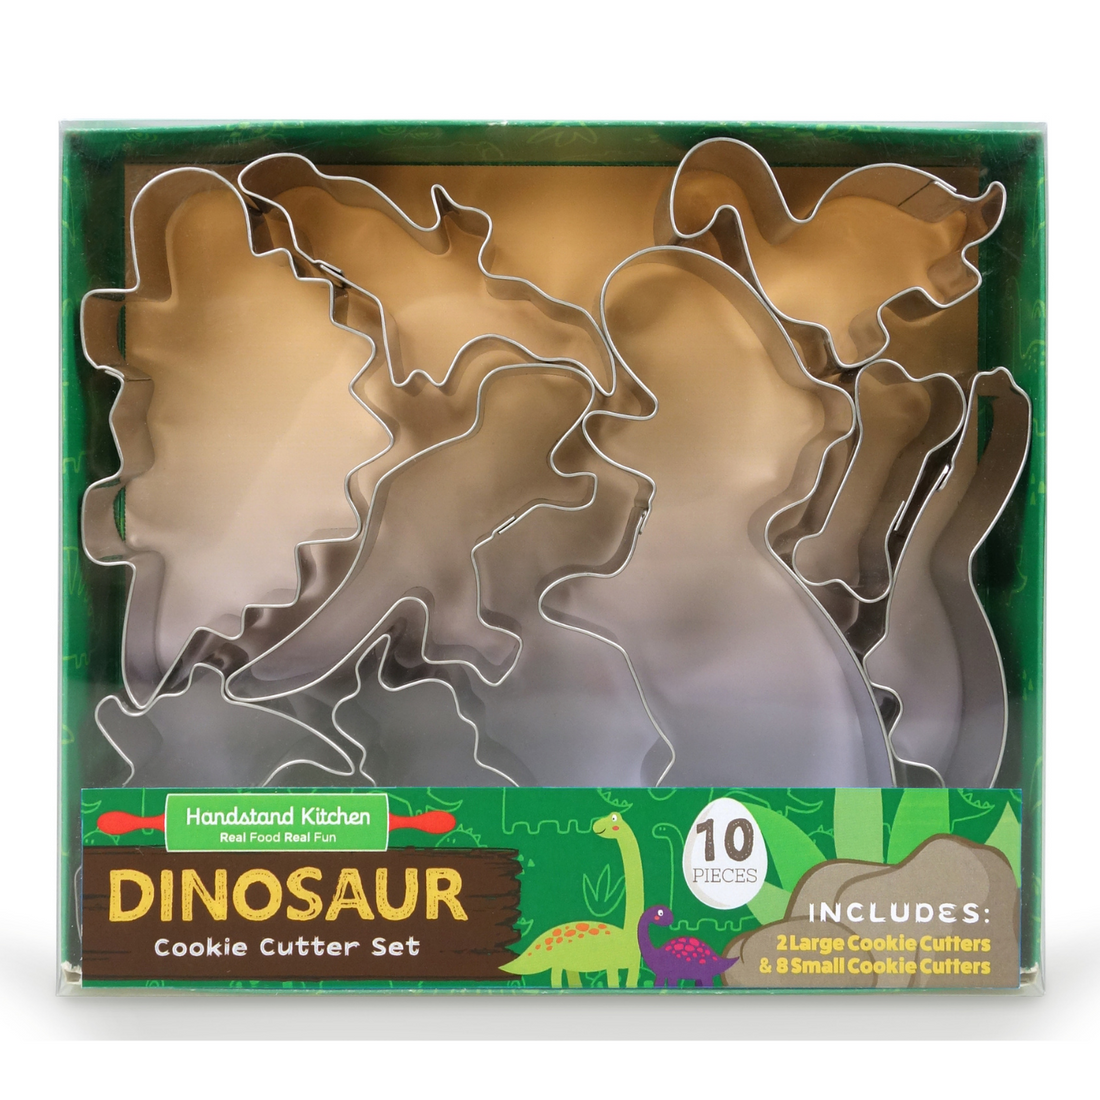 In box image of Dinosaur Cookie Cutter 10 Piece Boxed Set containing 10 dinosaur-shaped stainless steel cookie cutters